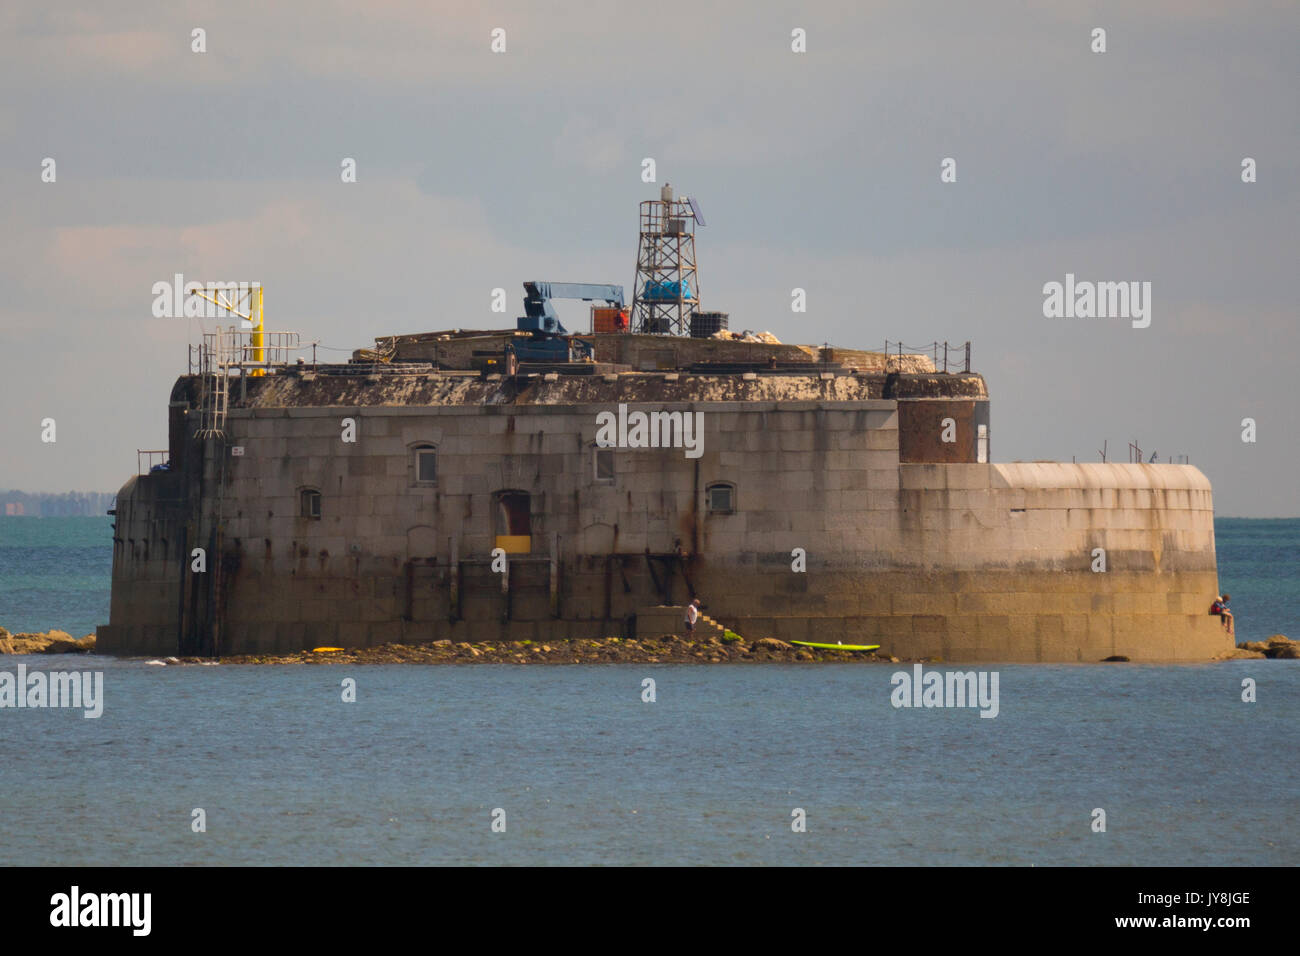 St Helens Fort is a sea fort in the Solent close to the Isle of Wight, one of the Palmerston Forts near Portsmouth. It was built between 1867 and 1880 as a result of the Royal Commission to protect the St Helens anchorage. Stock Photo